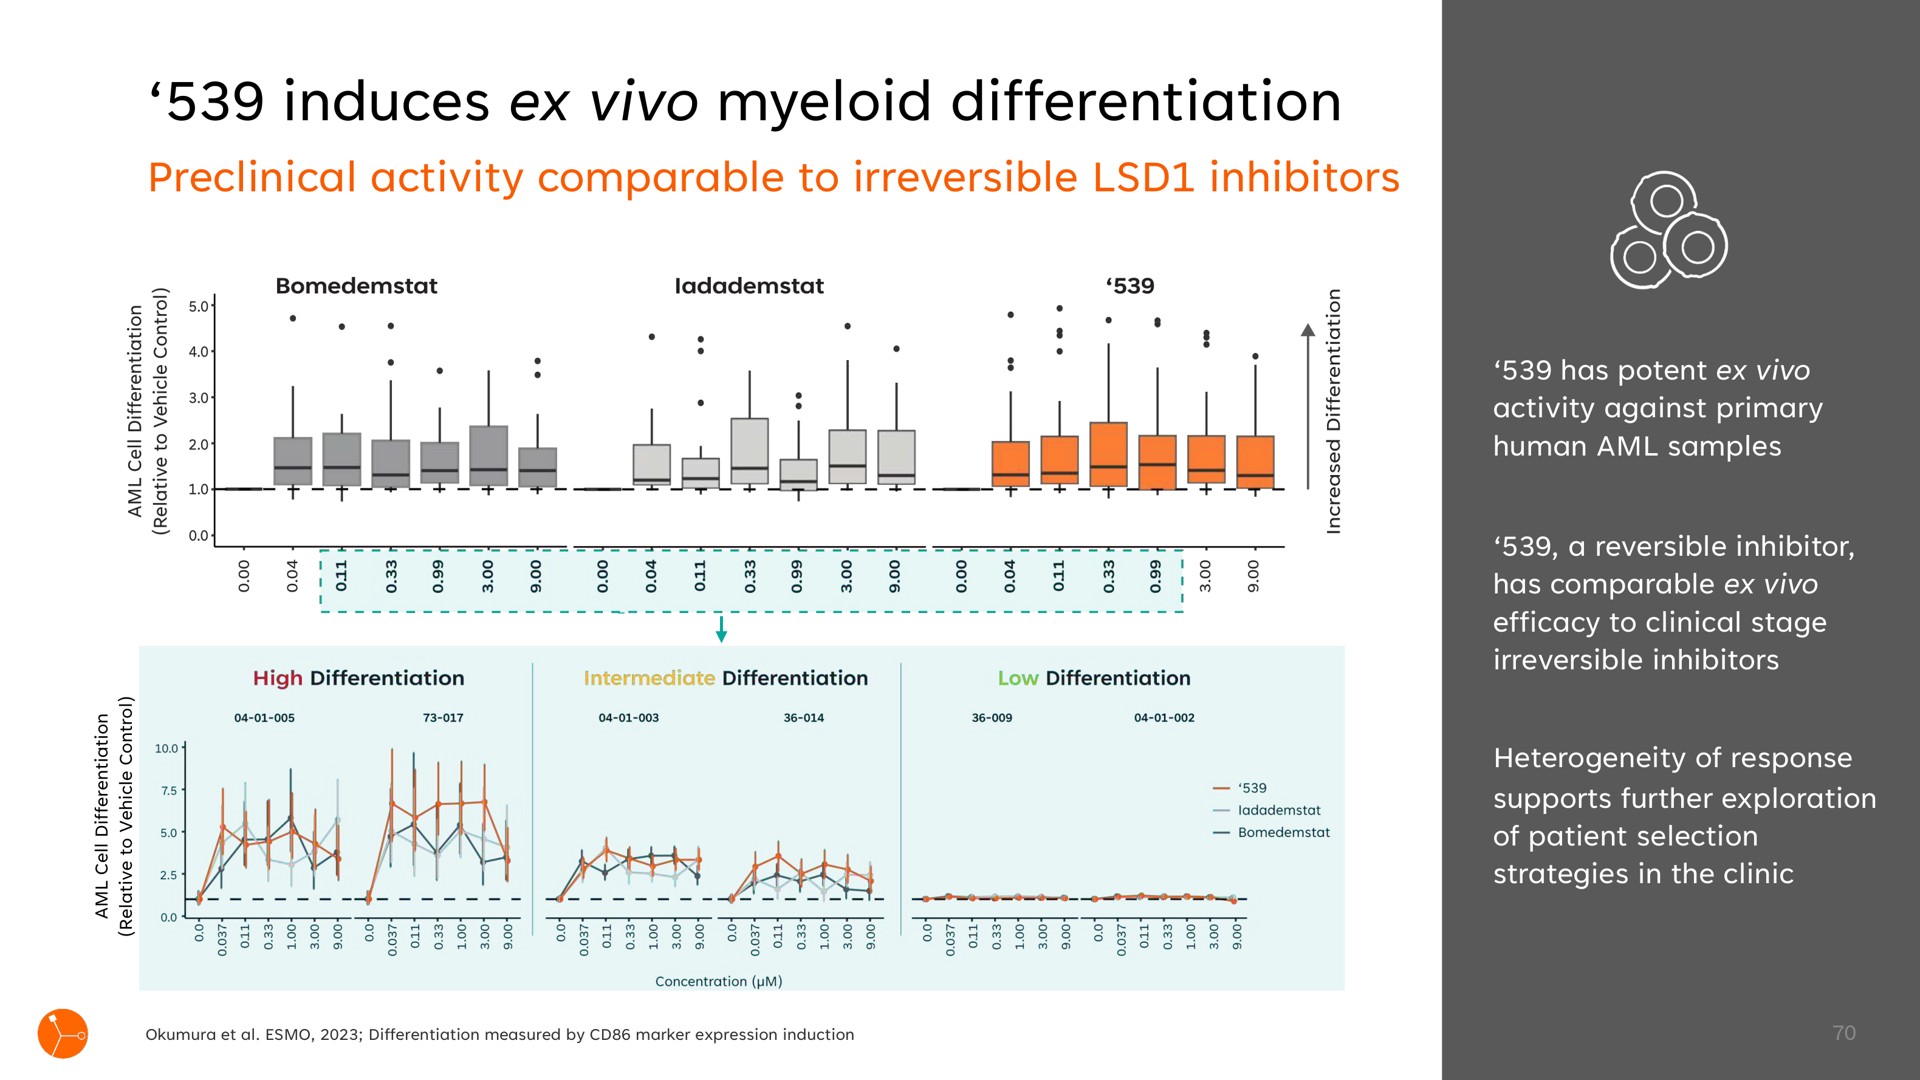 induces myeloid differentiation | Exscientia